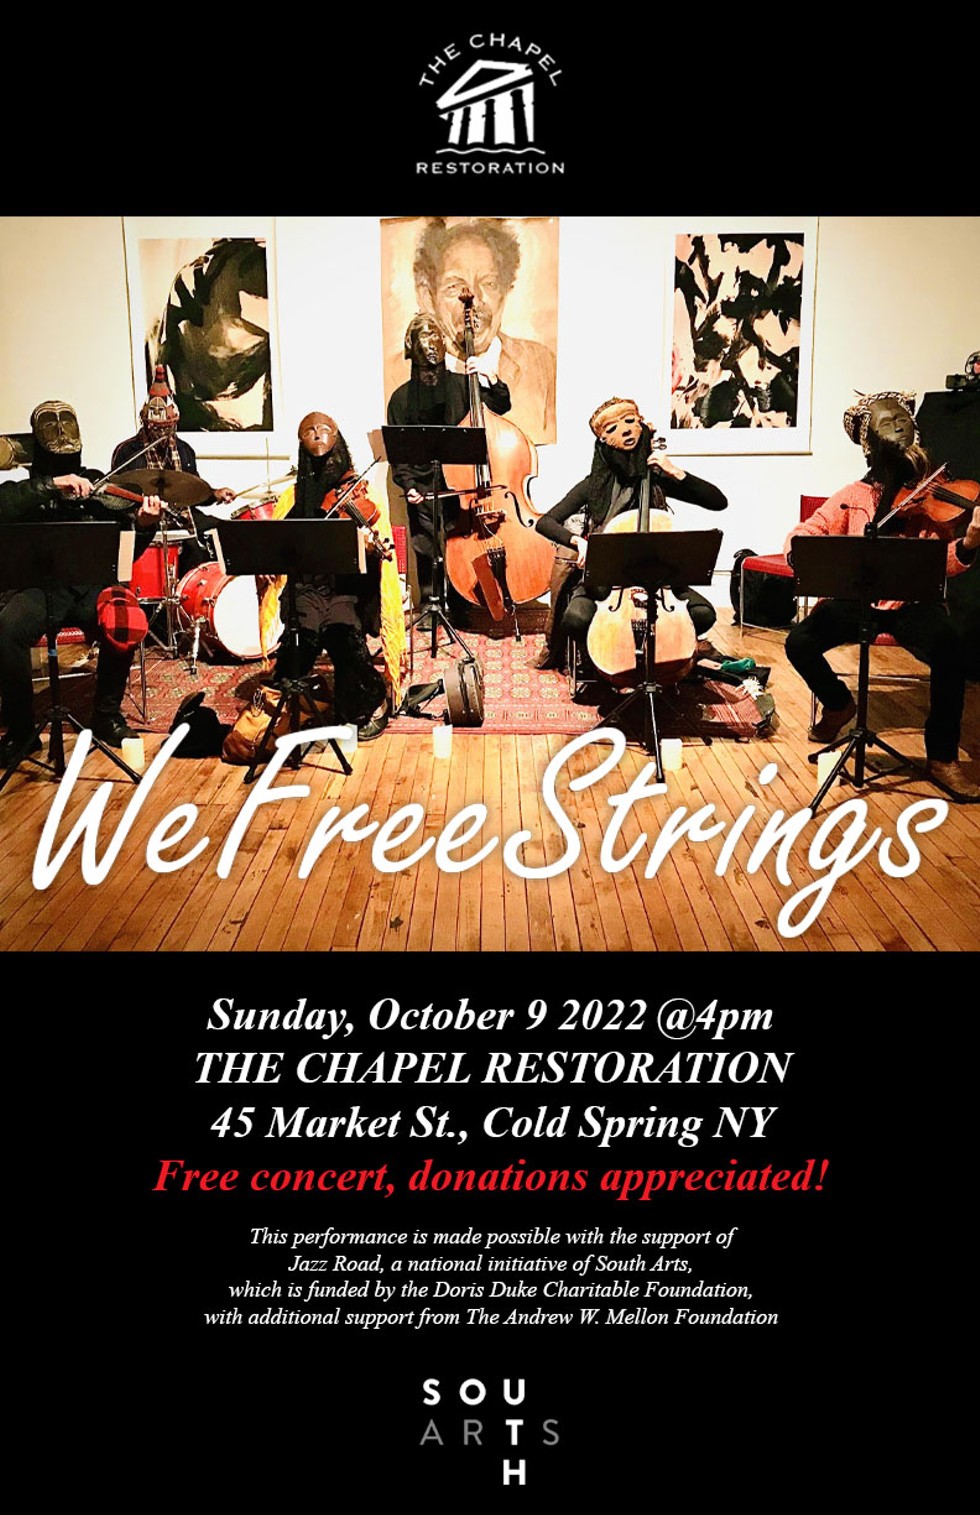 WeFreeStrings combine free jazz the music of African American string bands and classical avant garde